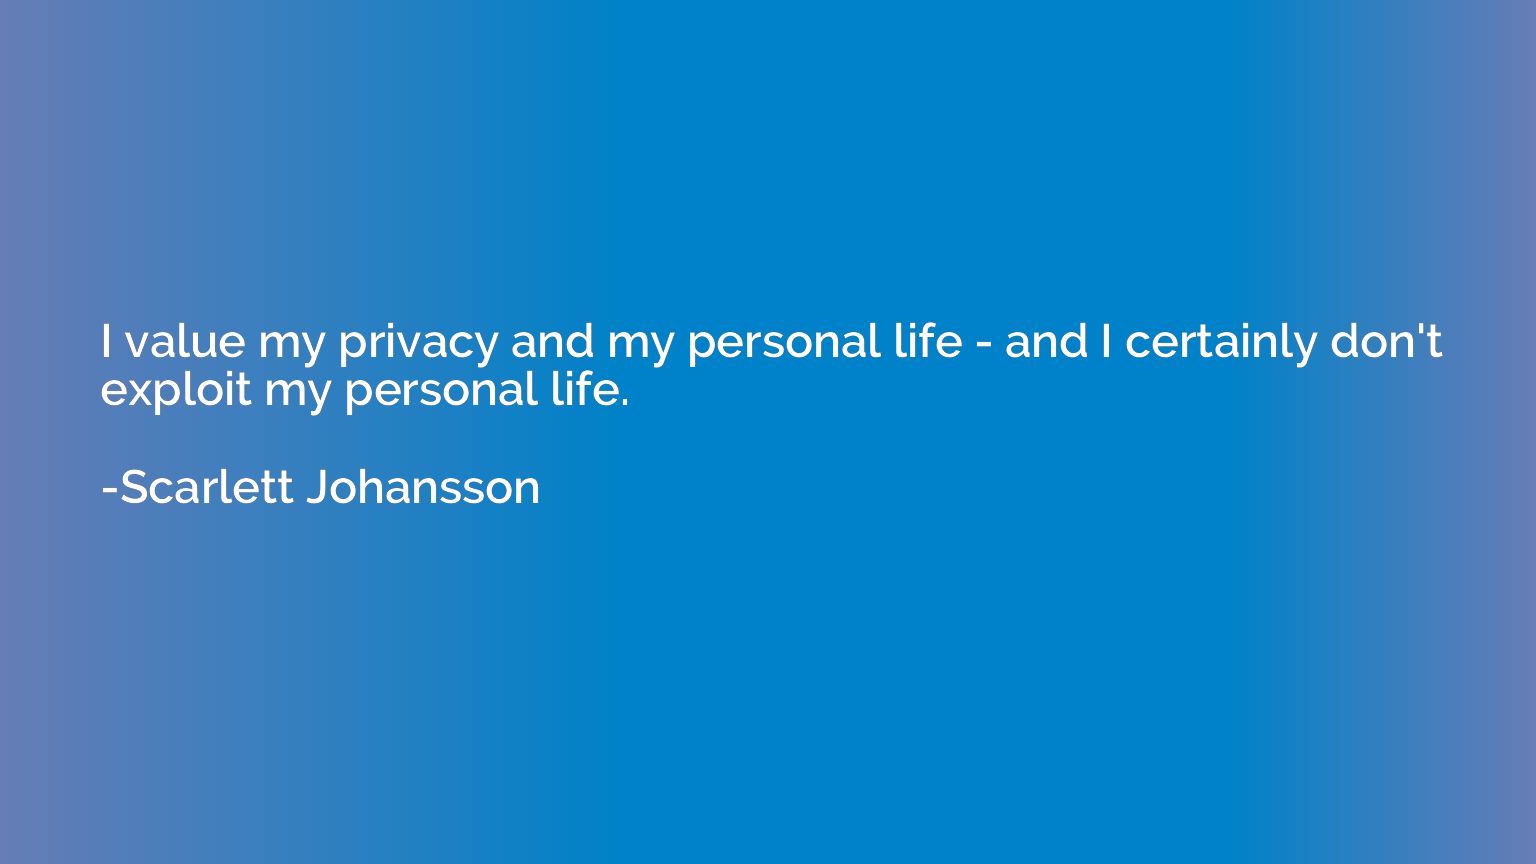 I value my privacy and my personal life - and I certainly do